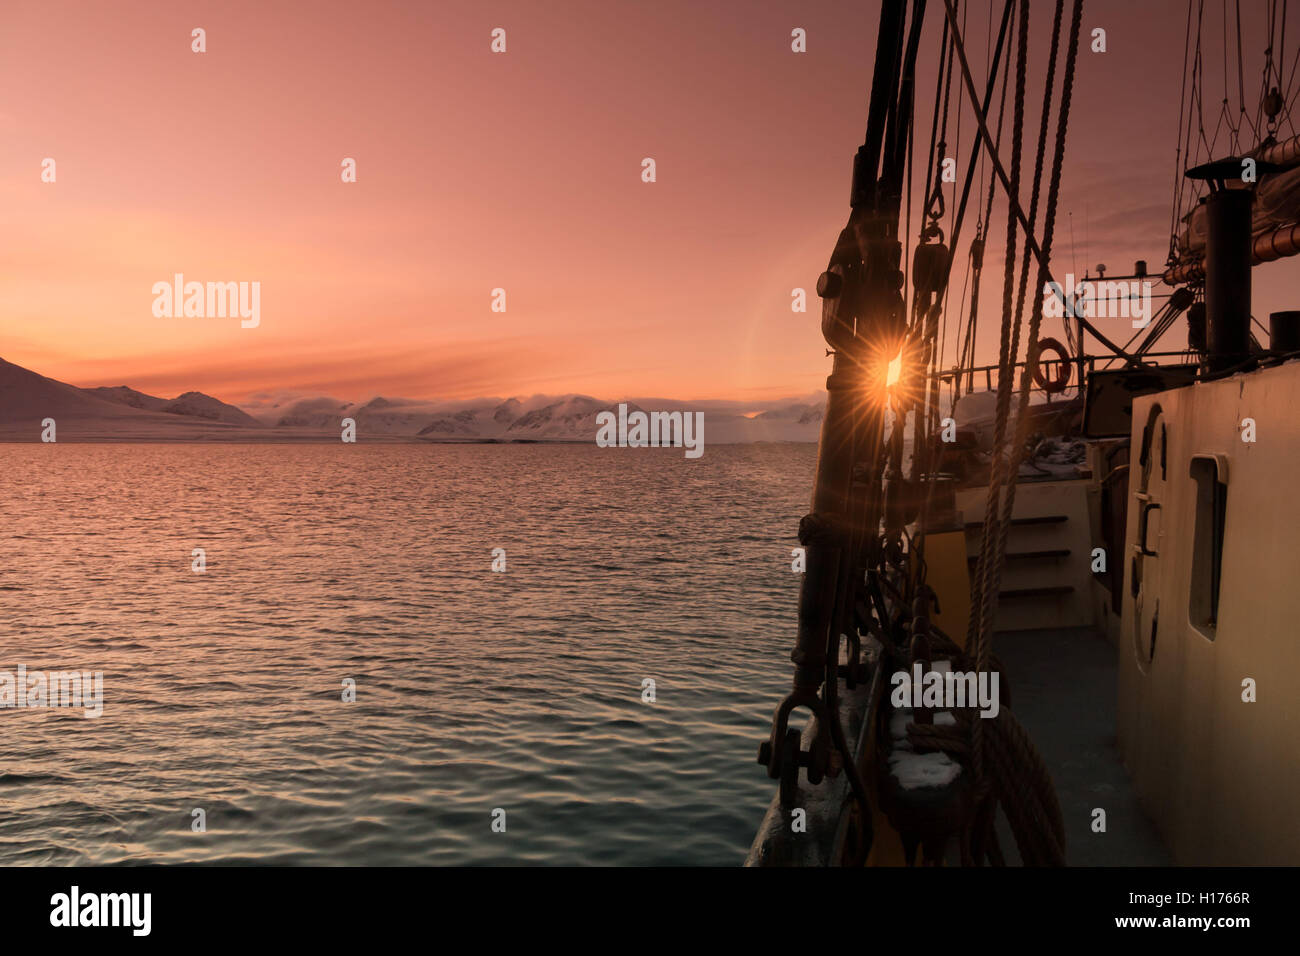 Sailing ship in the evening sun of Svalbard, Spitsbergen. Stock Photo